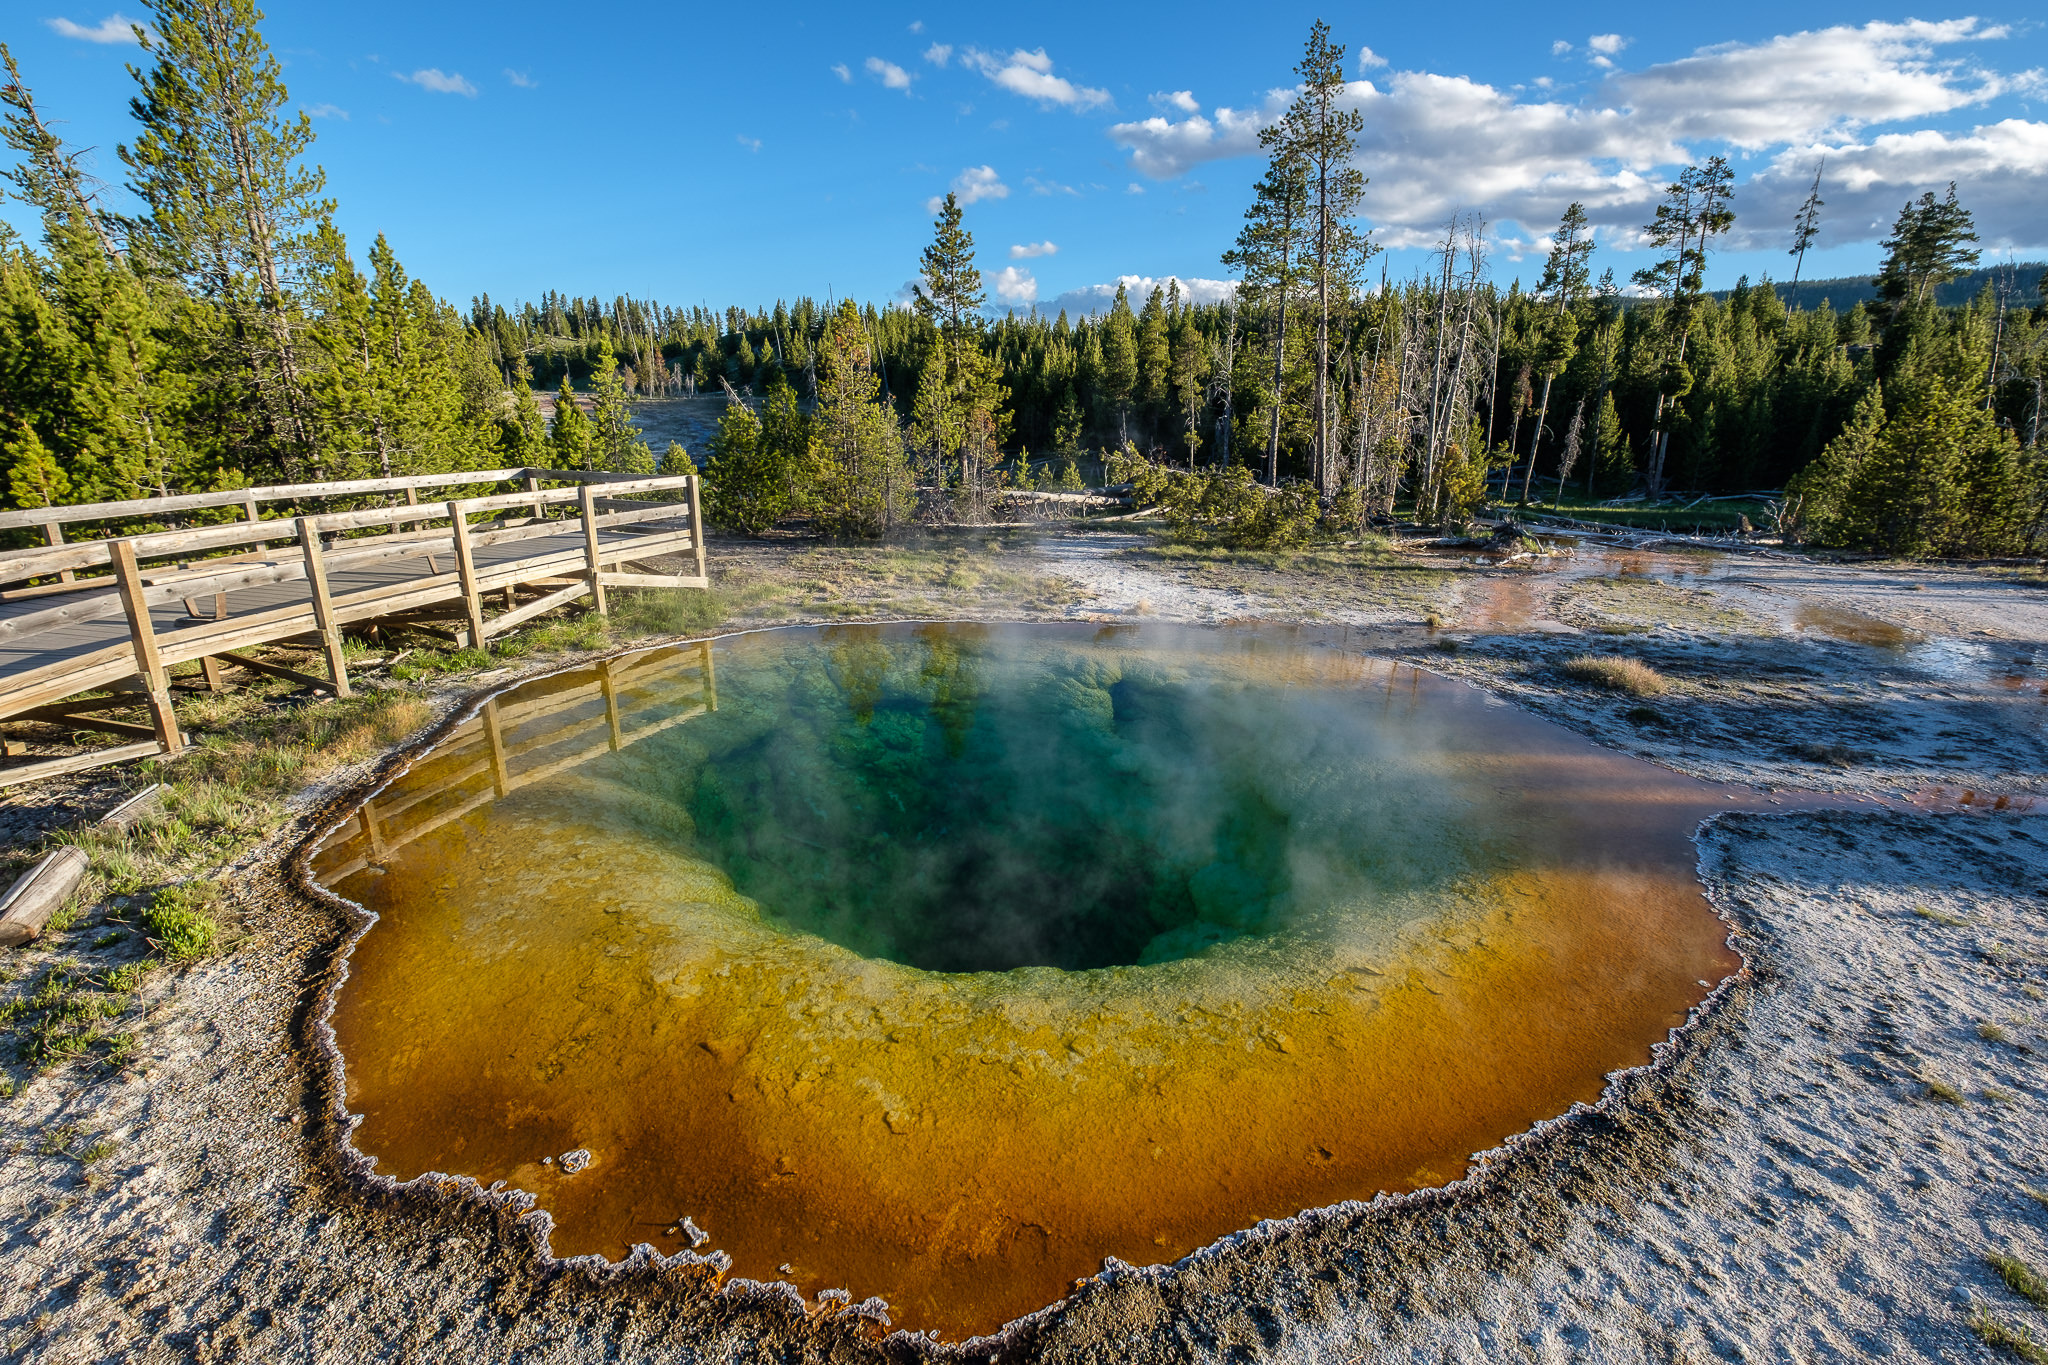 A Sad Tale of Photographing in Yellowstone